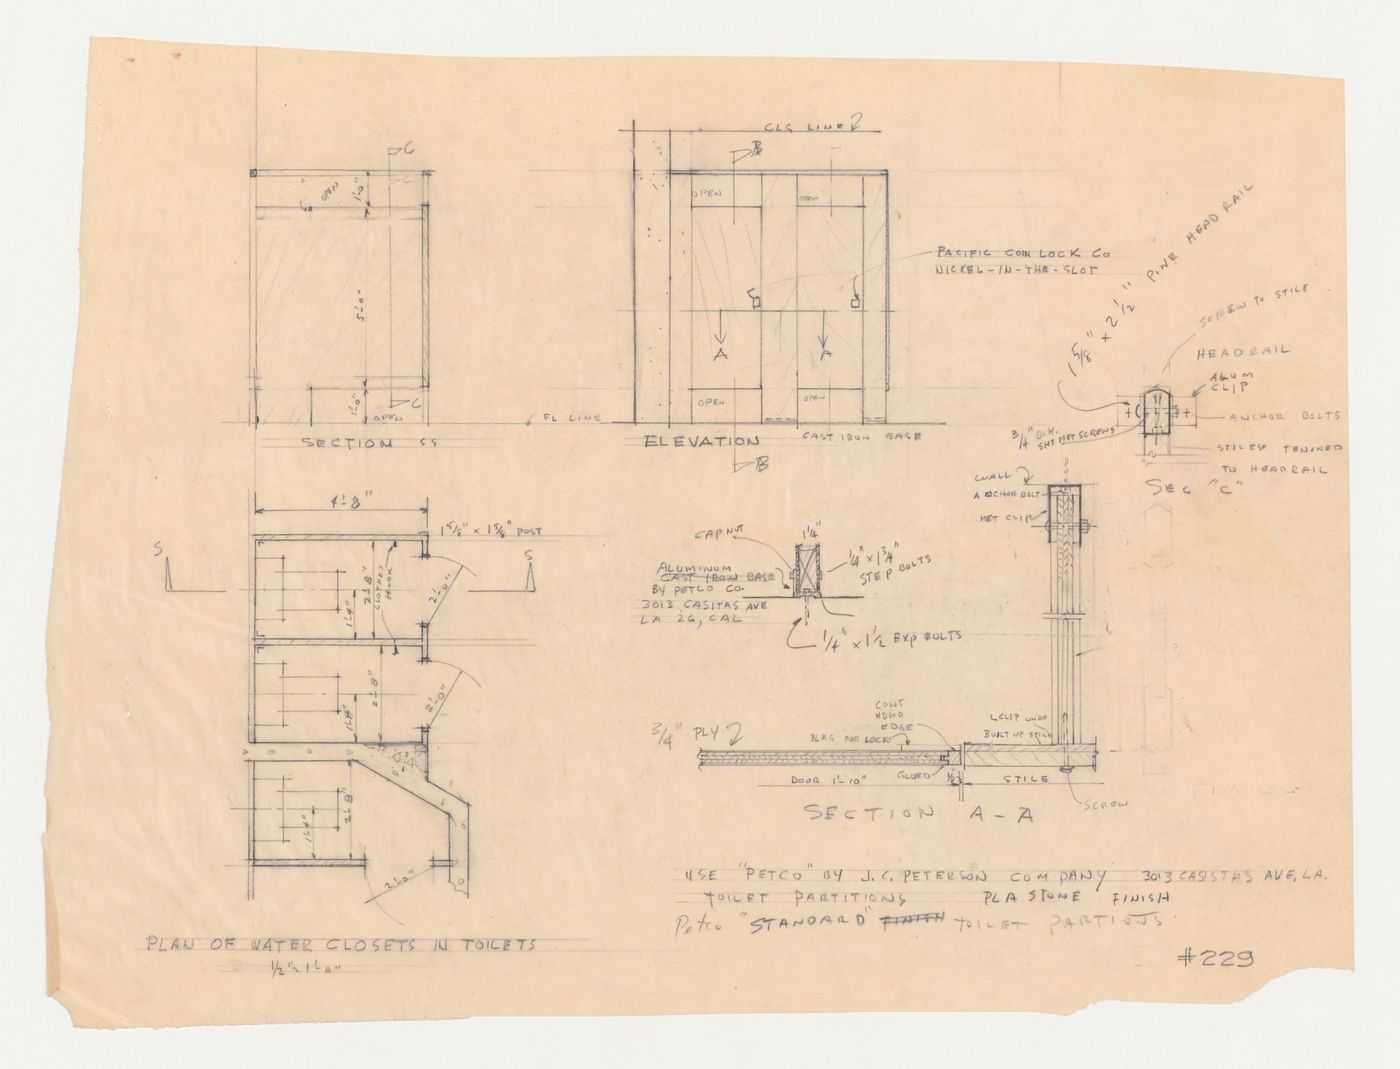 Wayfarers' Chapel, Palos Verdes, California: Plan, sections, elevation and details for toilet cubicles, possibly for the vestry